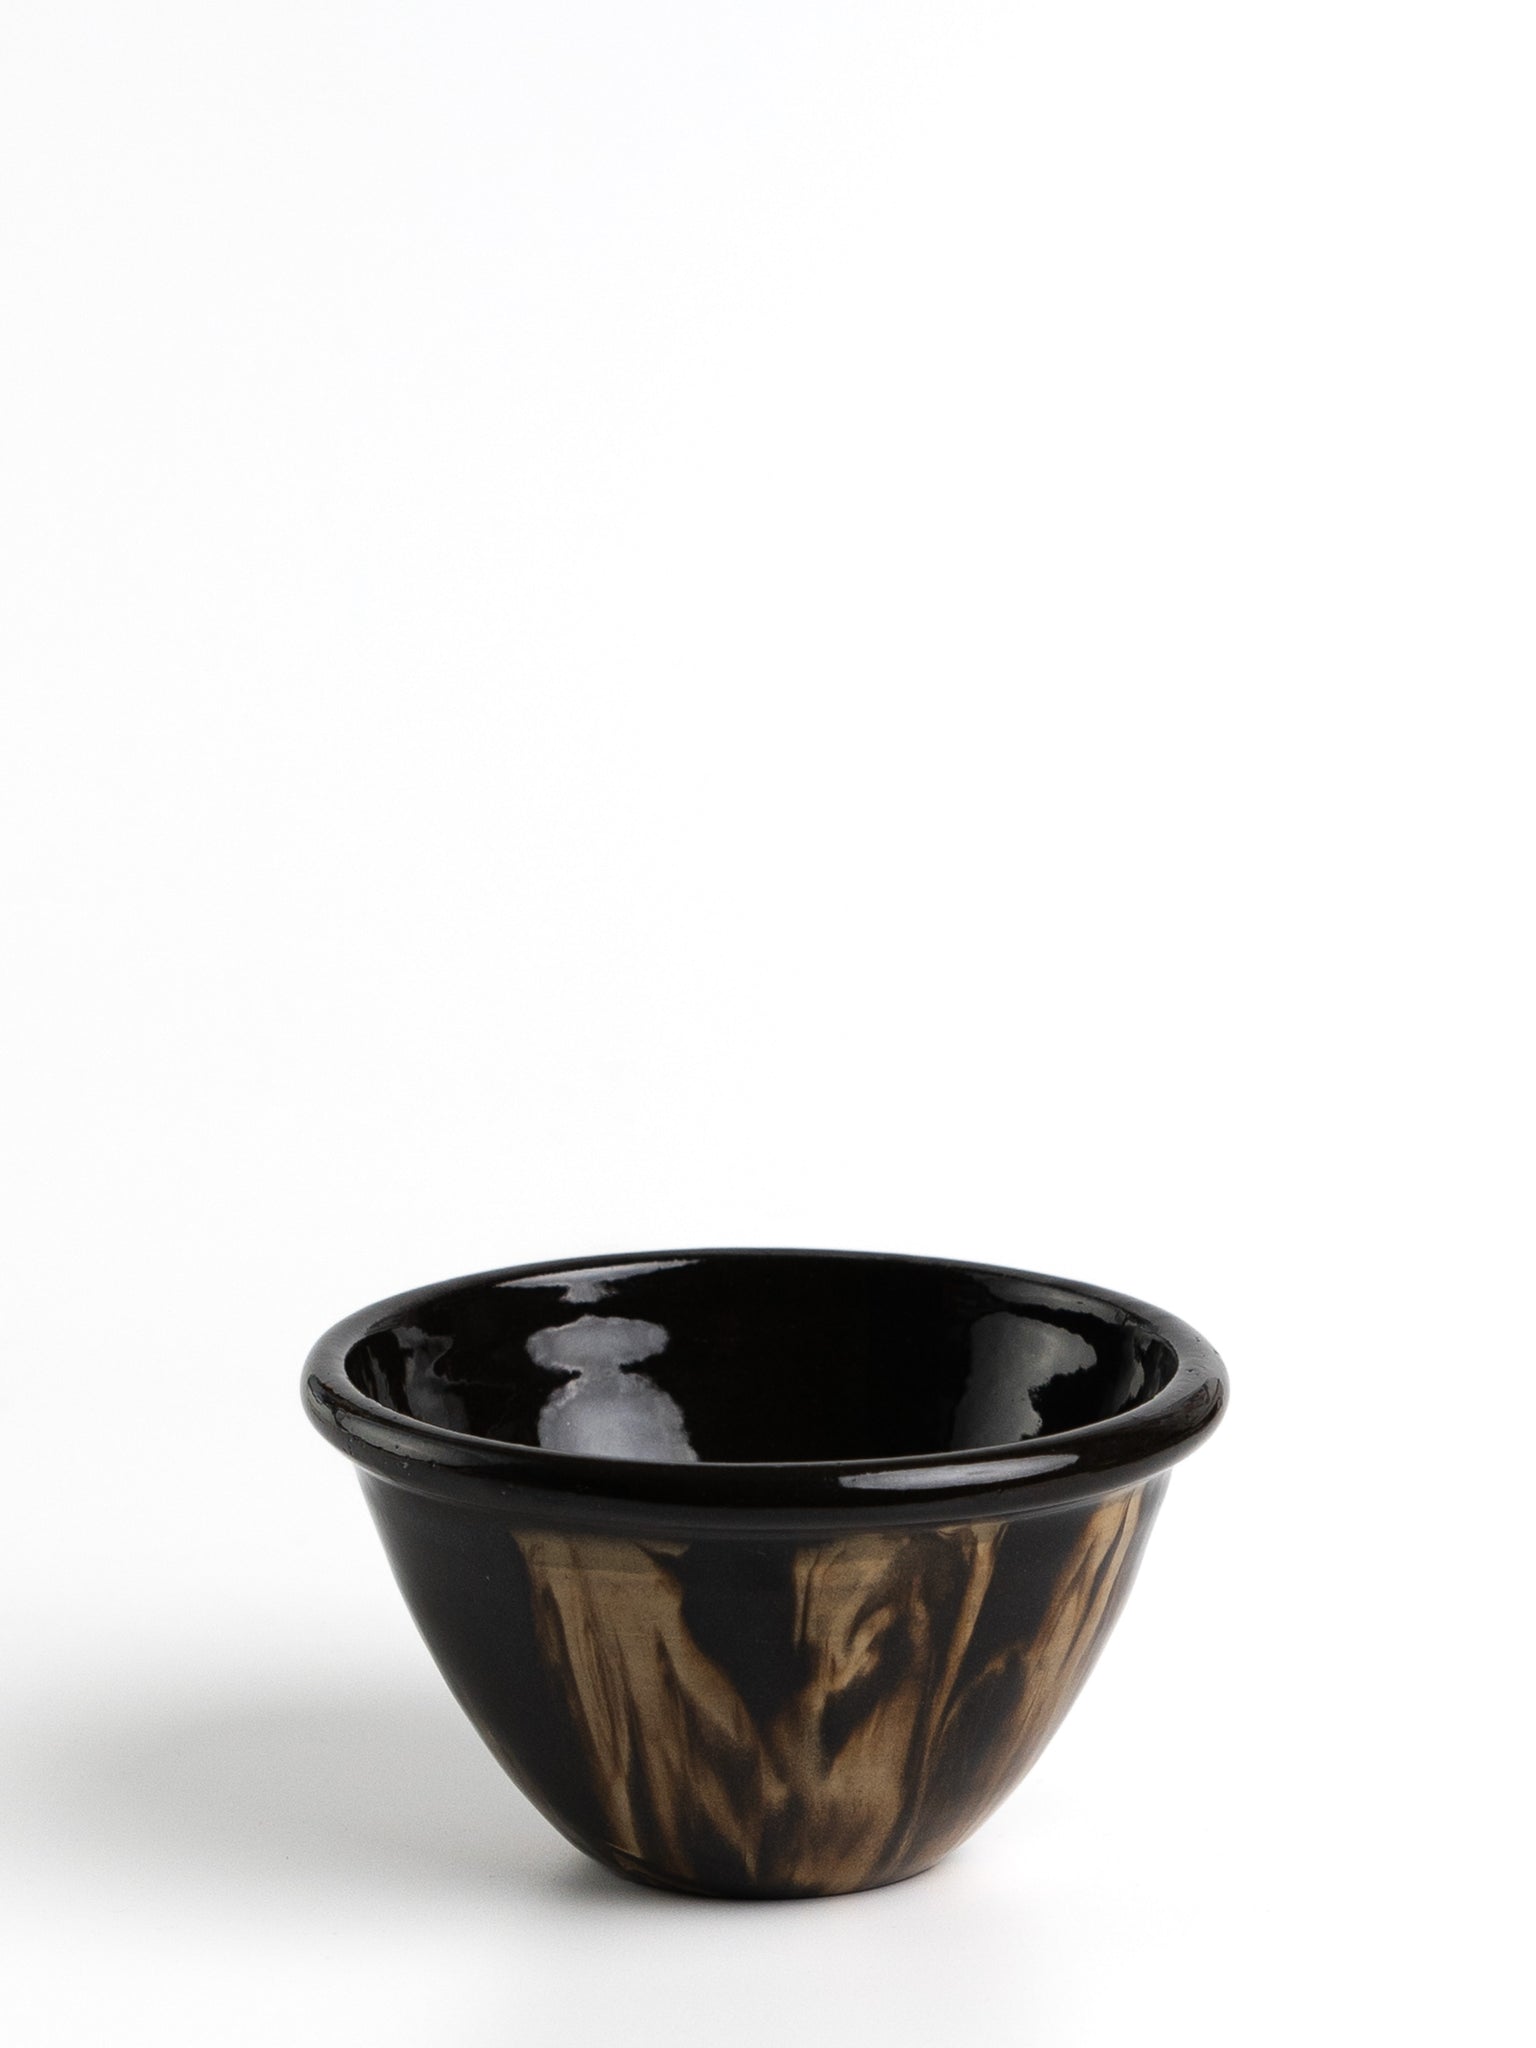 Rob Towler hand thrown black ceramic cereal bowl made in the uk